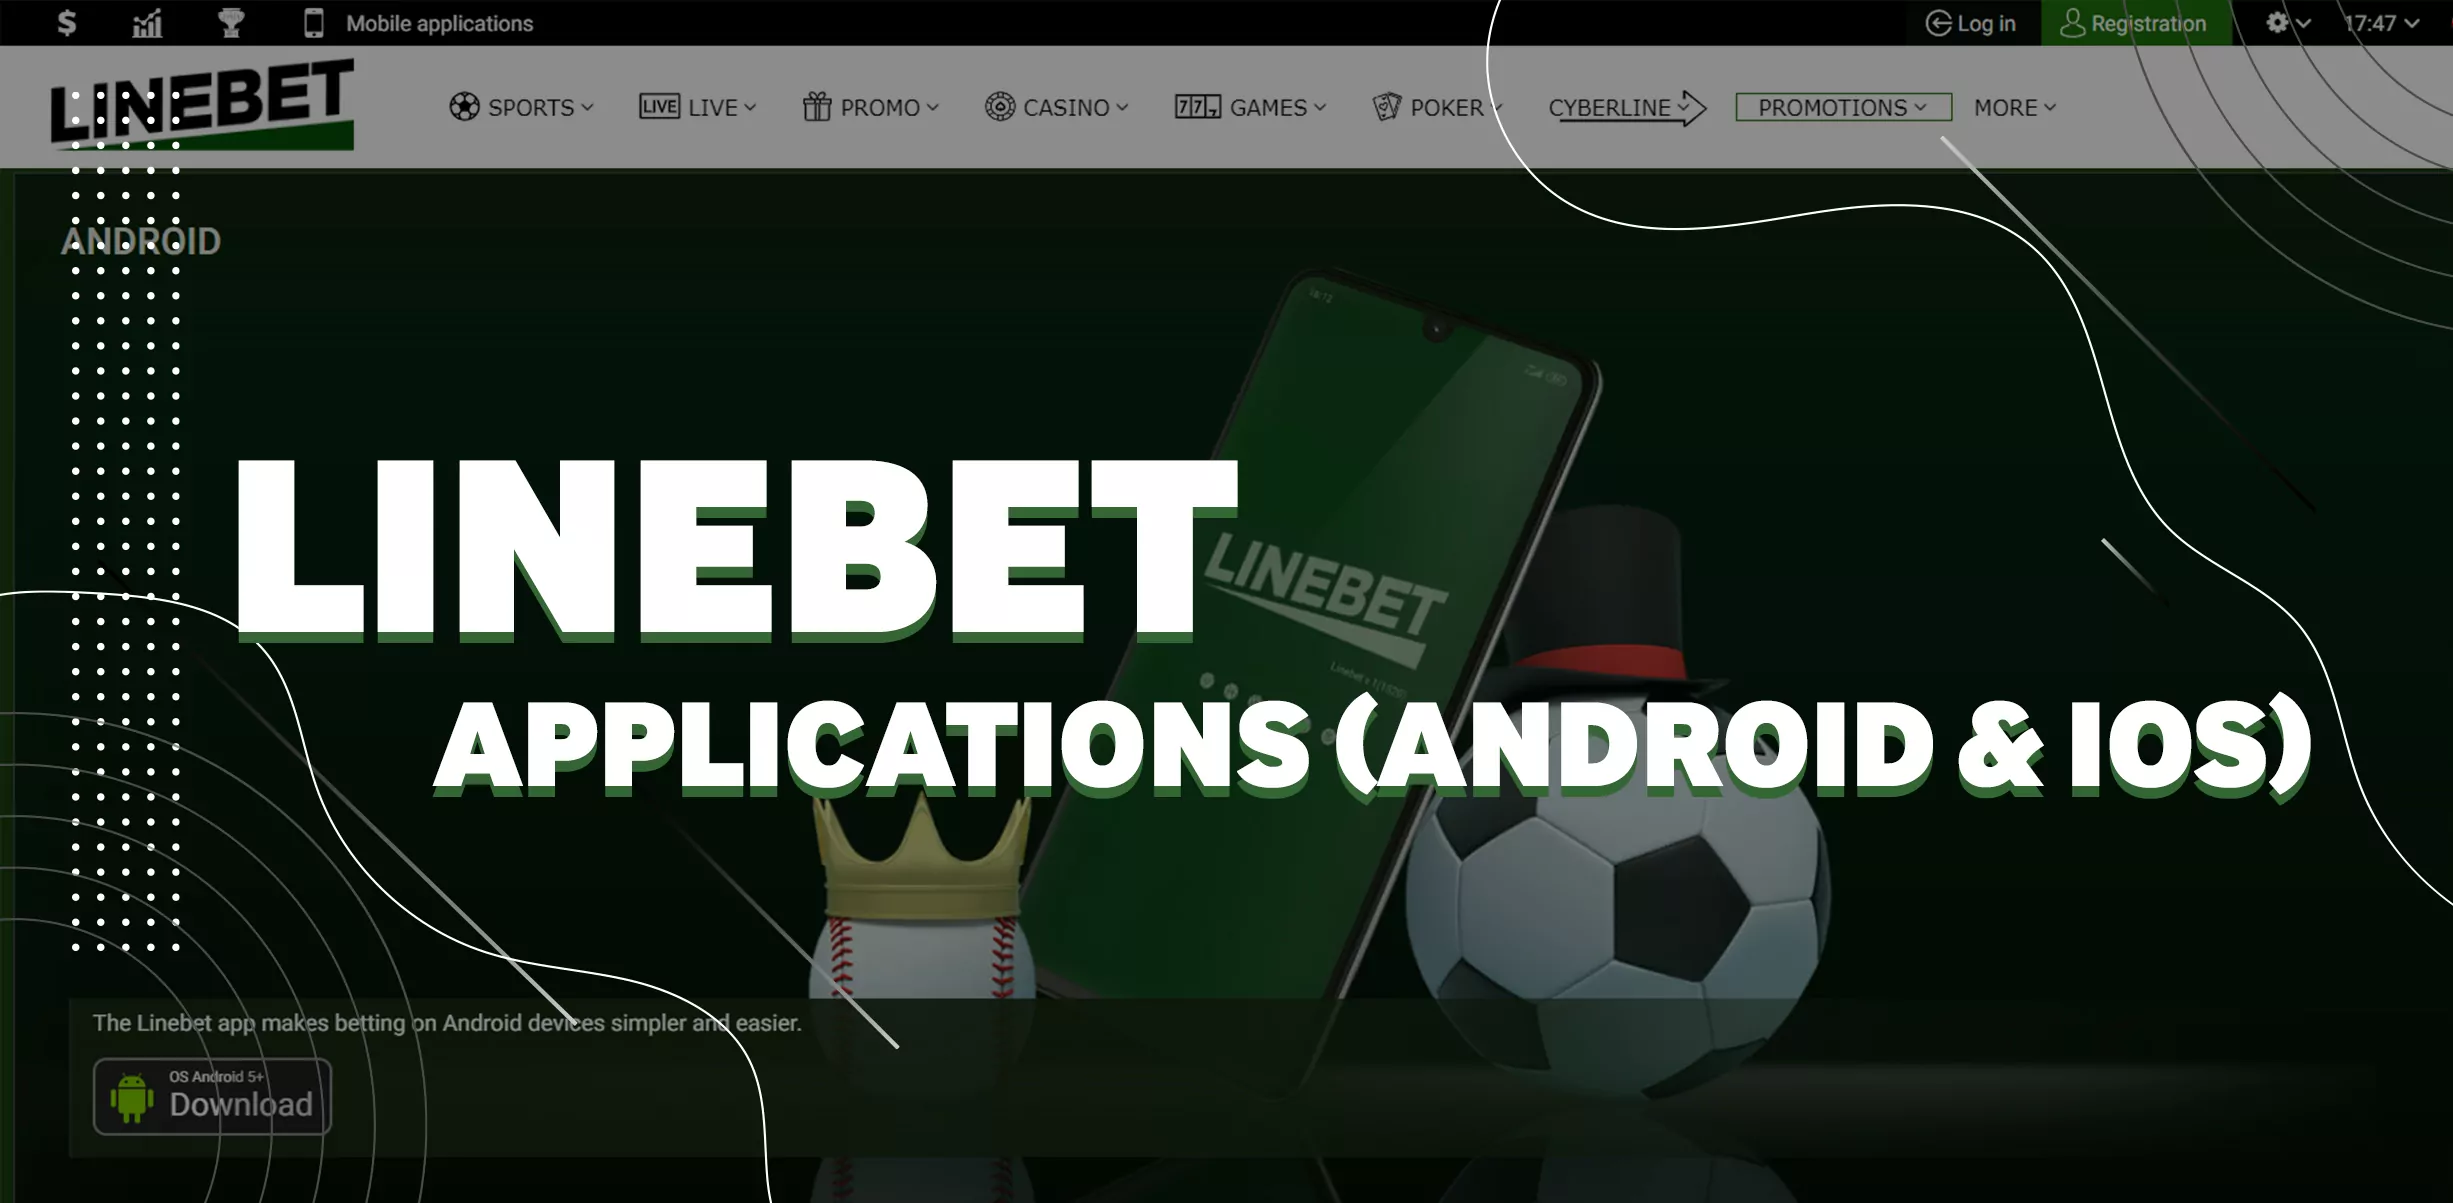 Download the Linebet APK Android and iPhone